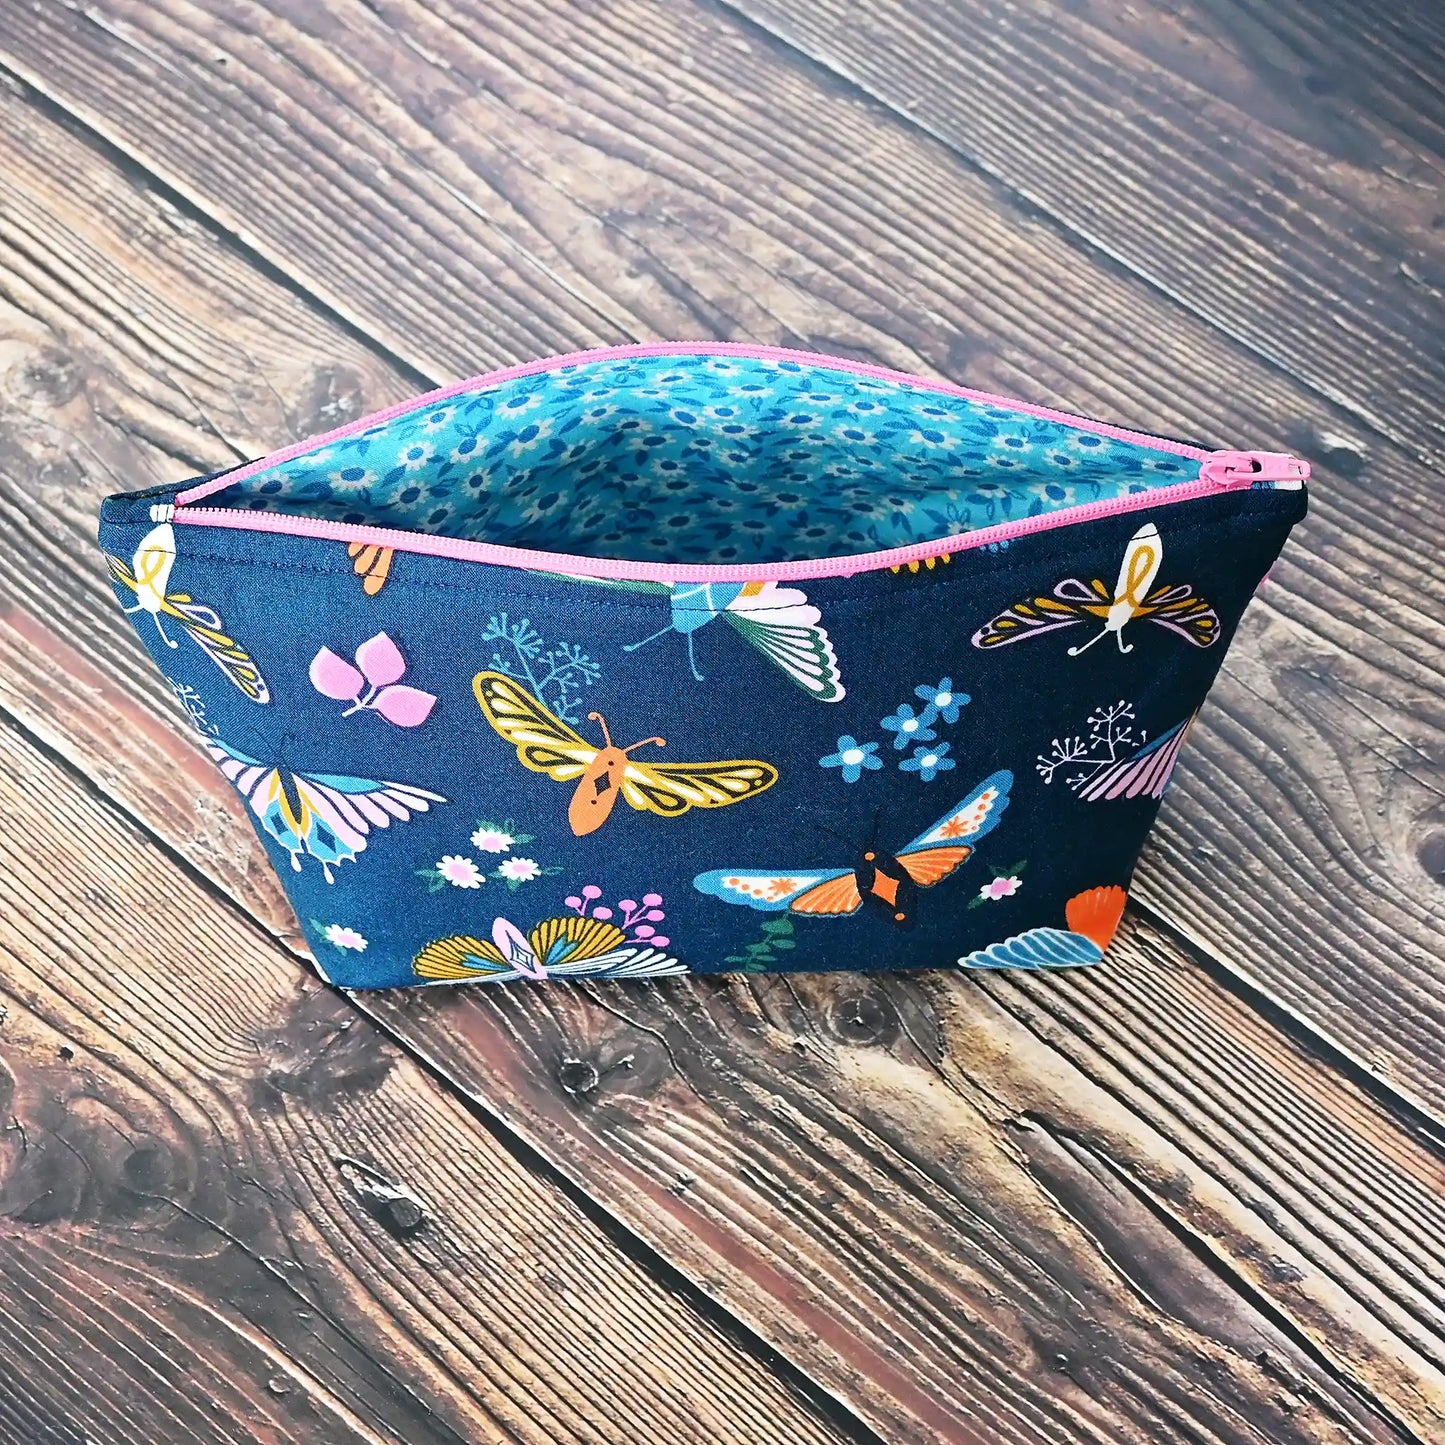 Beautiful navy accessory pouch with butterflies.  Lined in a pretty aqua floral and adorned with a pink zipper.  Made in fabrics by the Ruby Star Society.  Handmade in Canada by Yellow Petal Handmade.